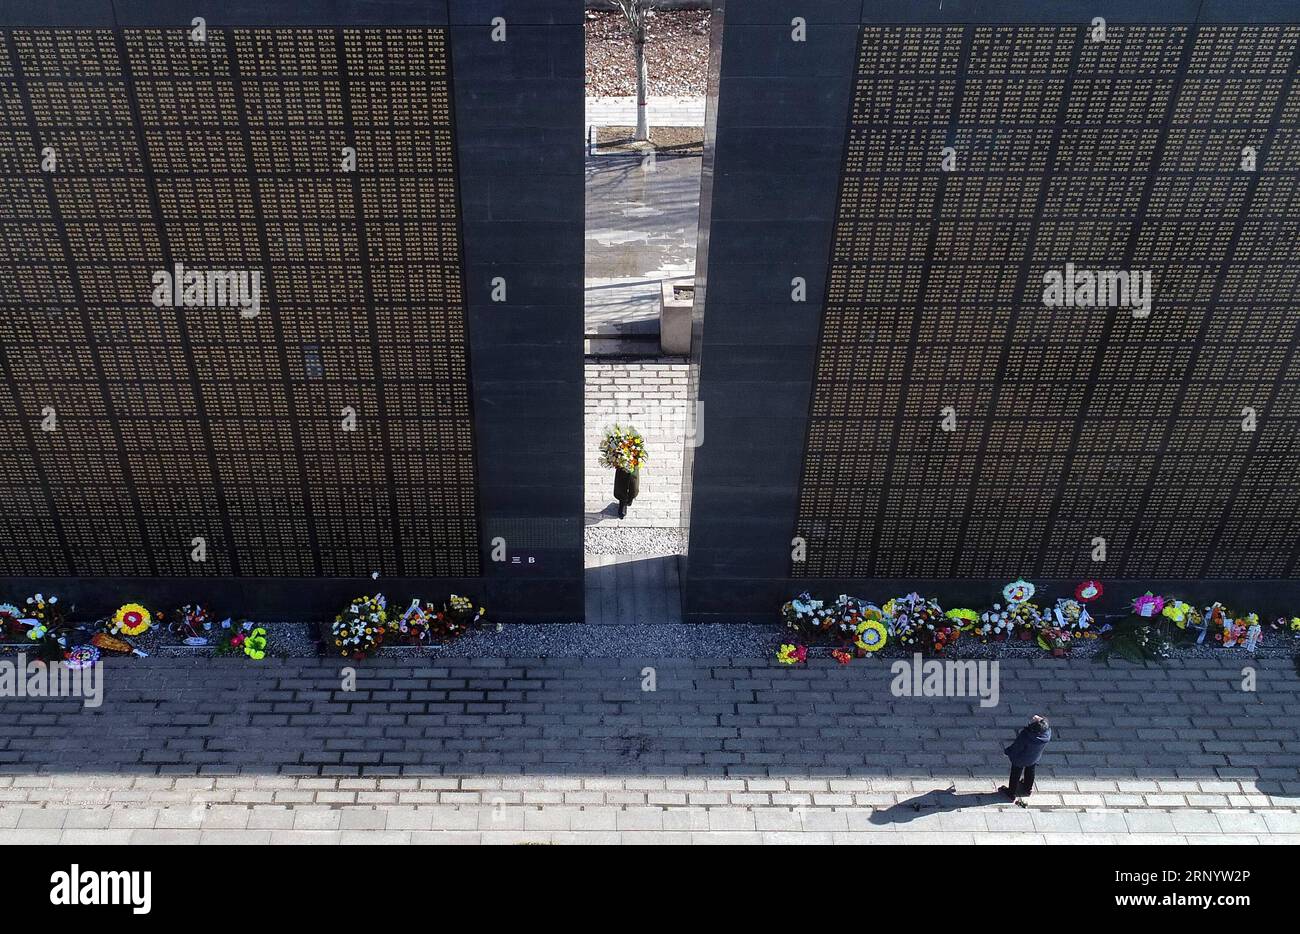 (180404) -- TANGSHAN, April 4, 2018 -- A well-wisher visits a memorial wall in remembrance of victims in the 1976 Tangshan Earthquake in Tangshan, north China s Hebei Province, on April 4, 2018, one day before the Qingming Festival when the deceased are commemorated.) (lmm) CHINA-HEBEI-EARTHQUAKE-VICTIM-REMEMBRANCE (CN) DongxJun PUBLICATIONxNOTxINxCHN Stock Photo